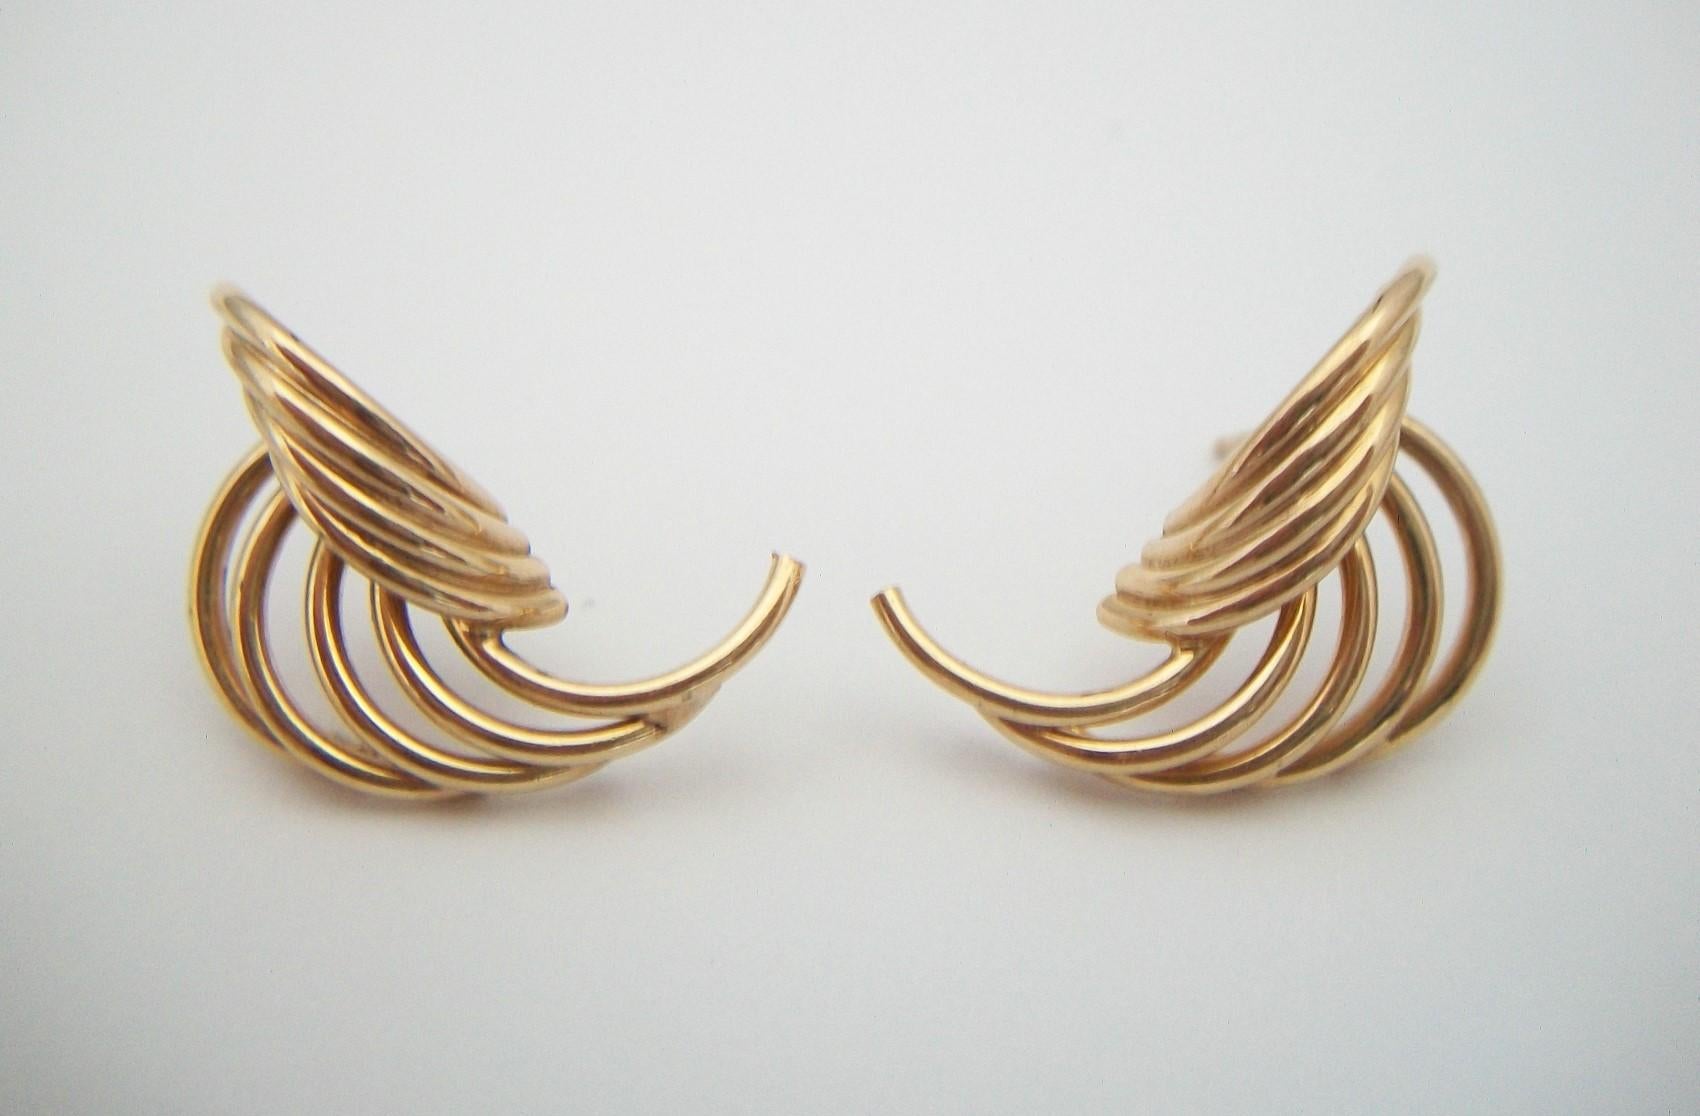 Vintage pair of Retro style 10K yellow gold earrings - featuring a 'C' scroll wirework design - butterfly backs (gold tone - not photographed) - signed on each post (unidentified maker - see last photos) - United States - circa 1990's.

Excellent